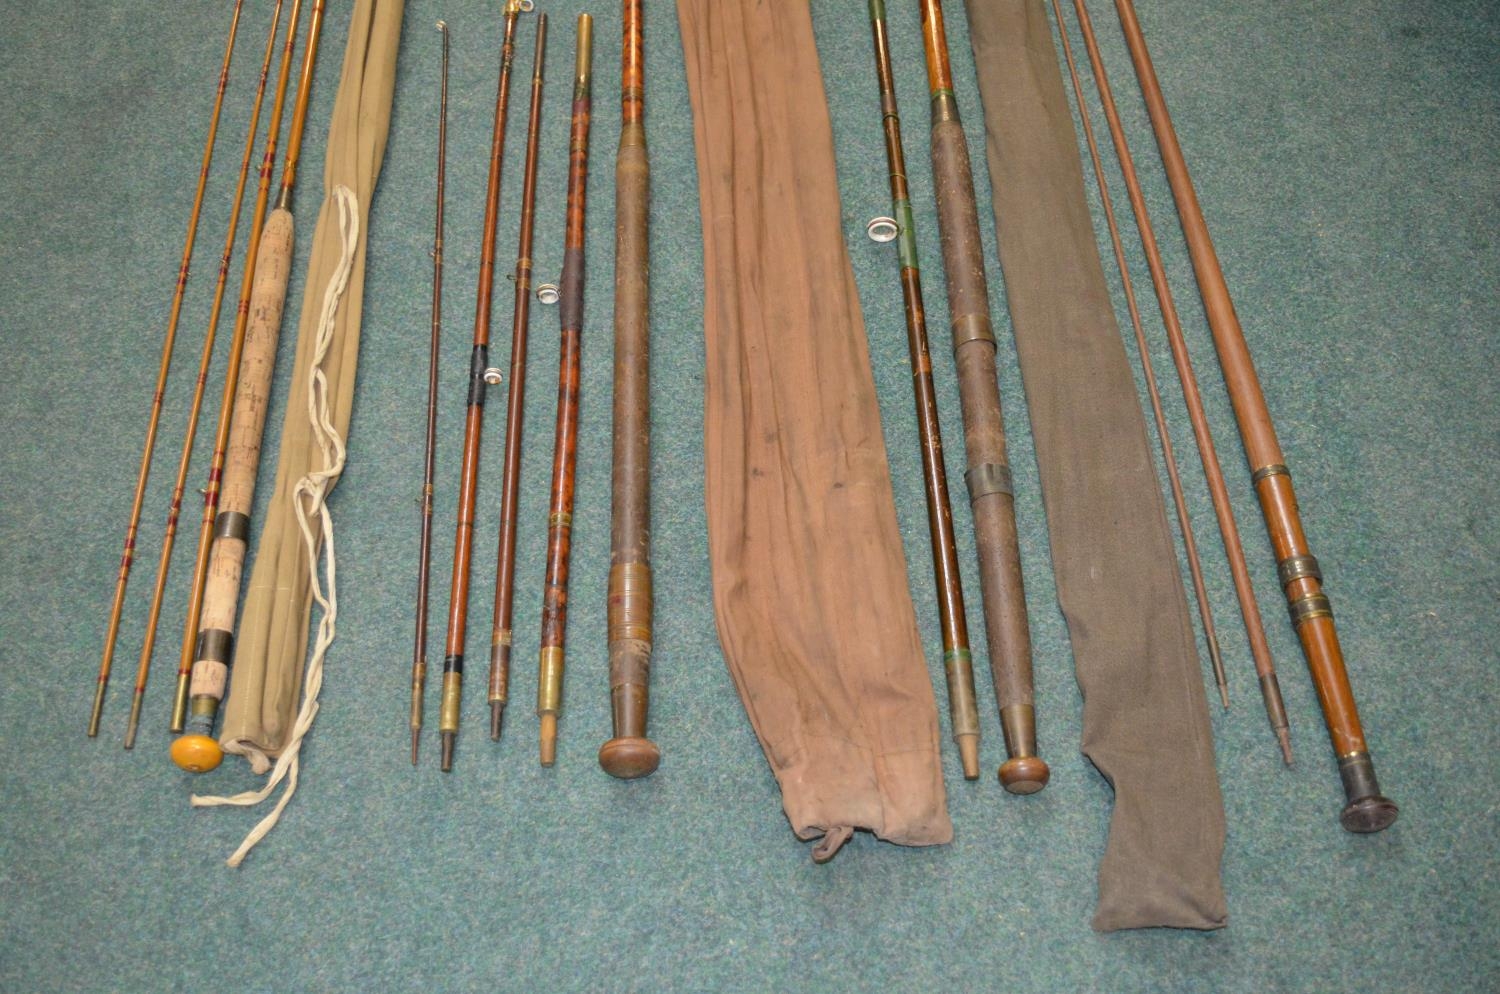 Four vintage fishing rods - unfinished solid wood turned three piece fishing rod L310cm (A/F), - Image 3 of 11